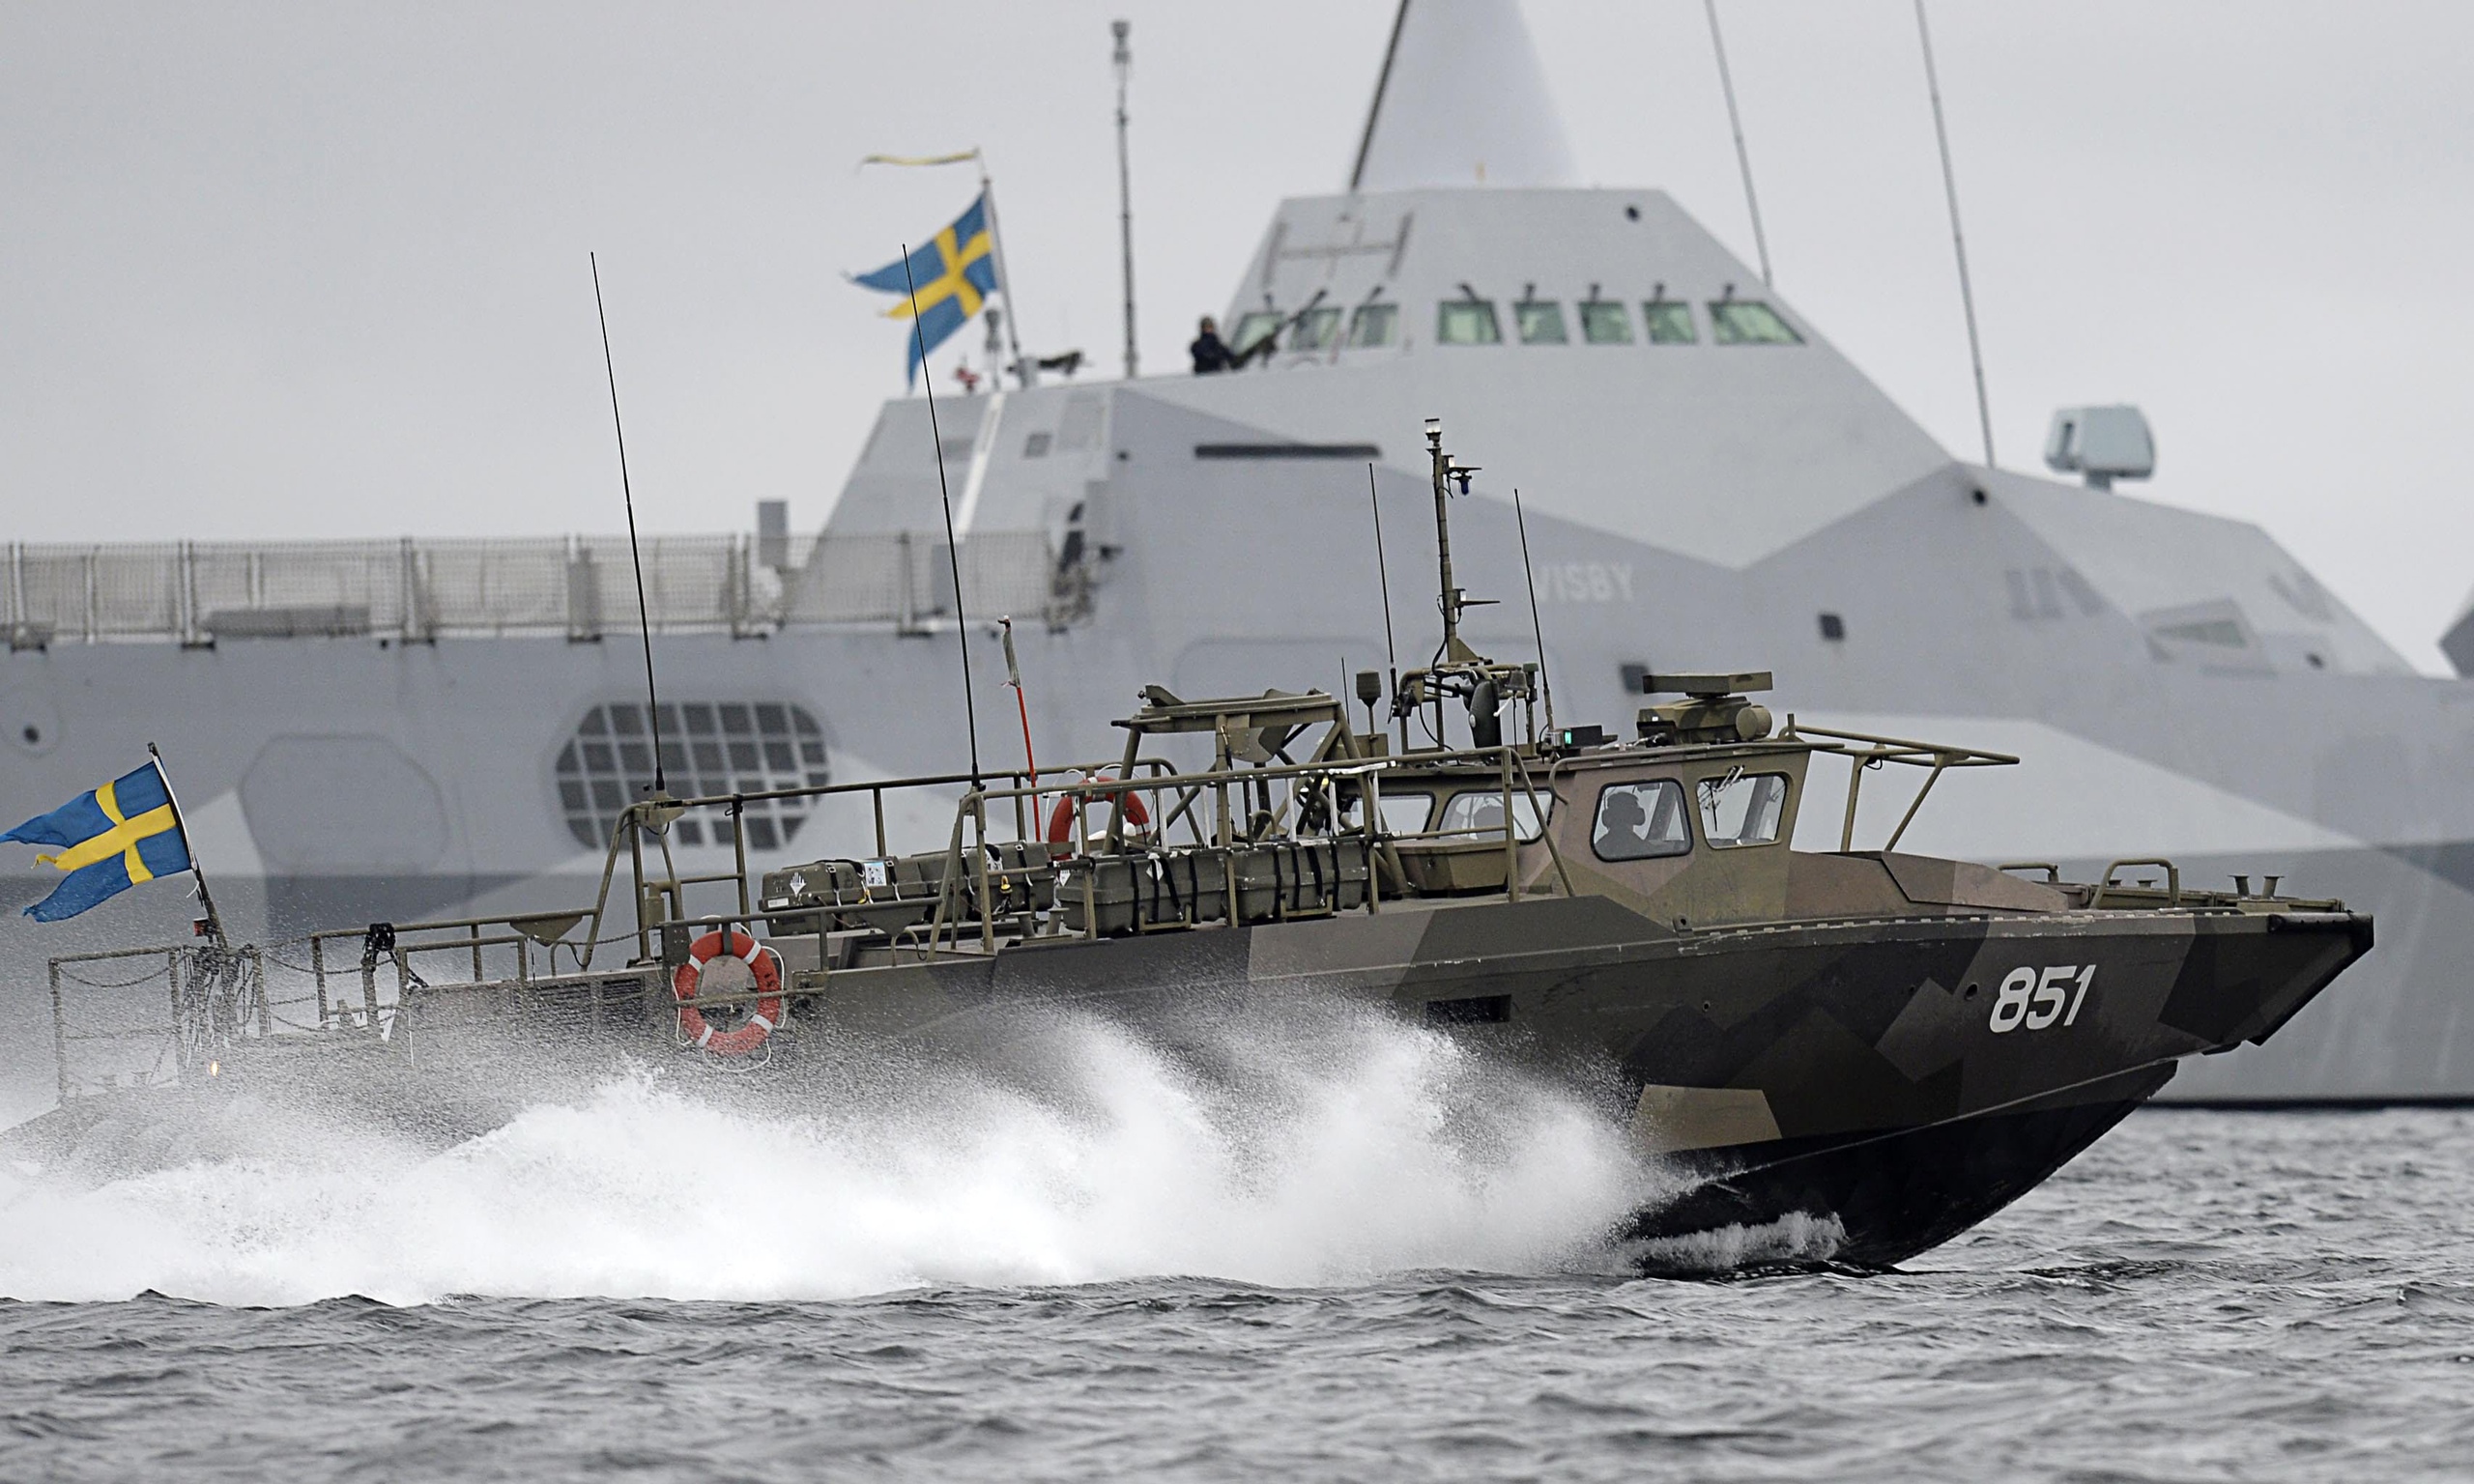 Swedish Armed Forces Widen Hunt For Suspected Submarine World News